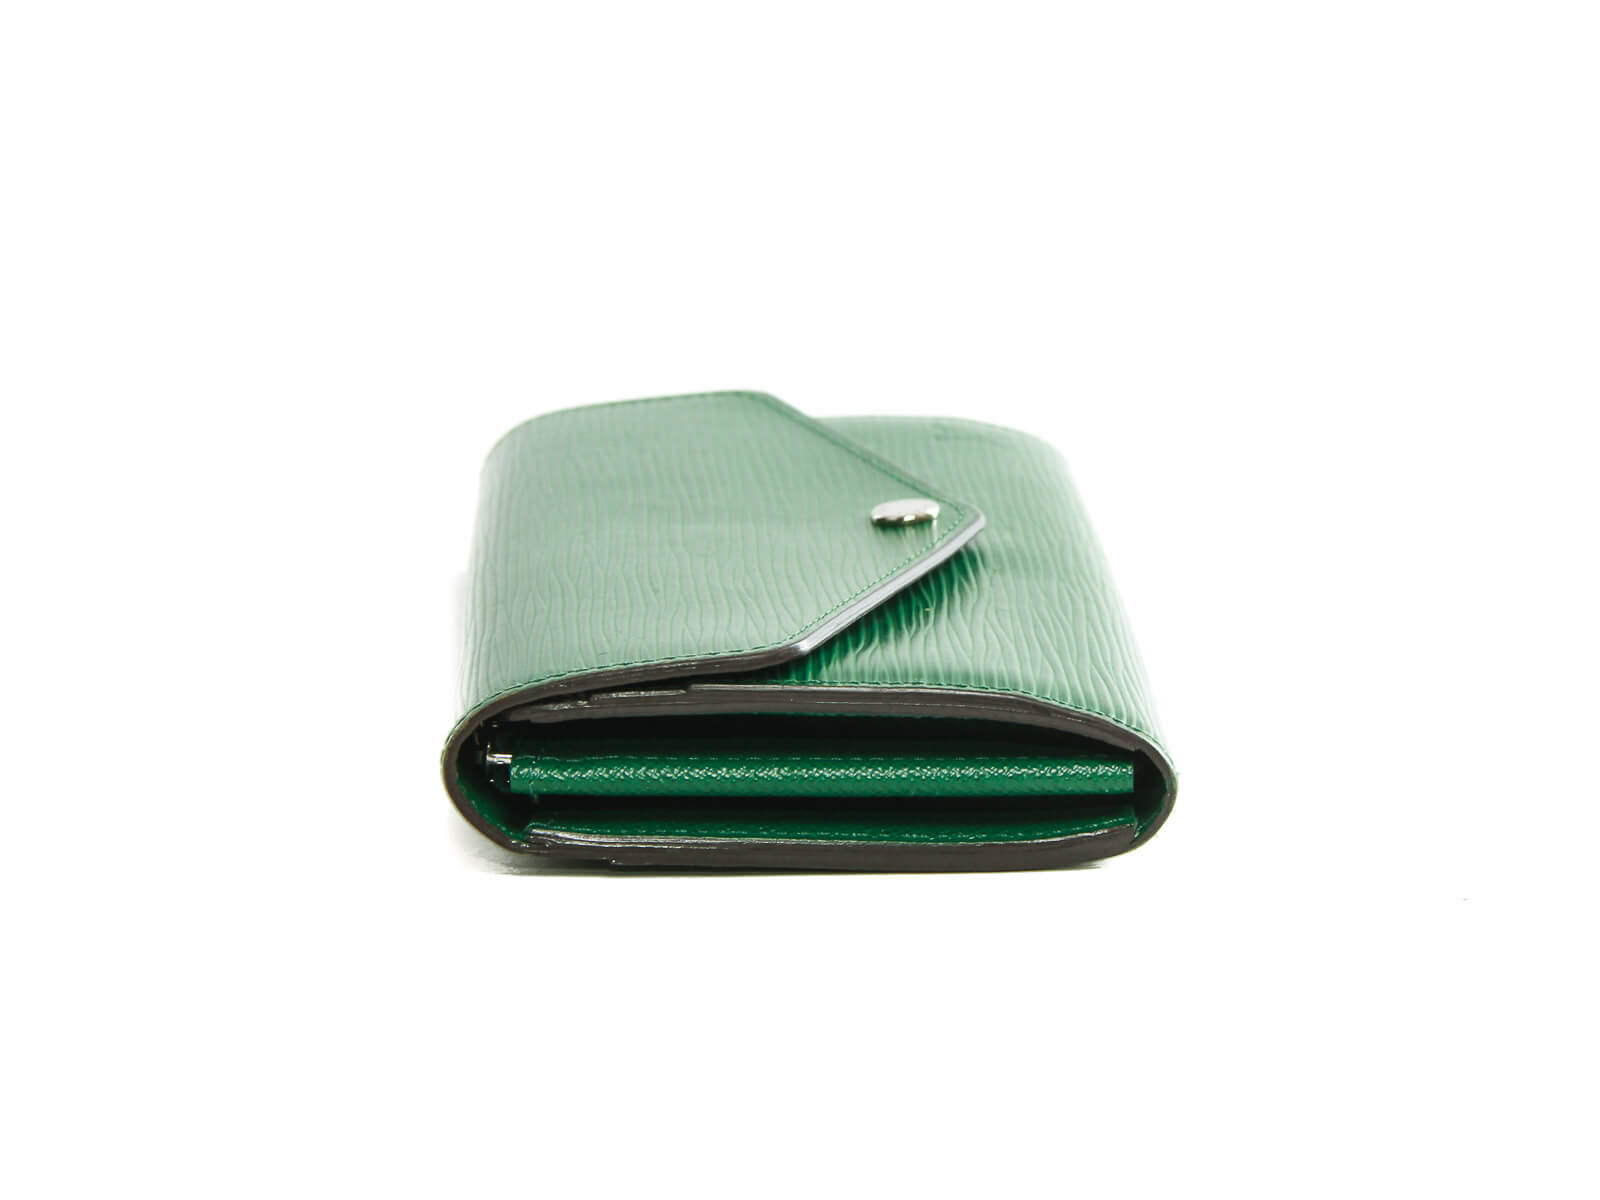 Sarah leather wallet Louis Vuitton Green in Leather - 35901952